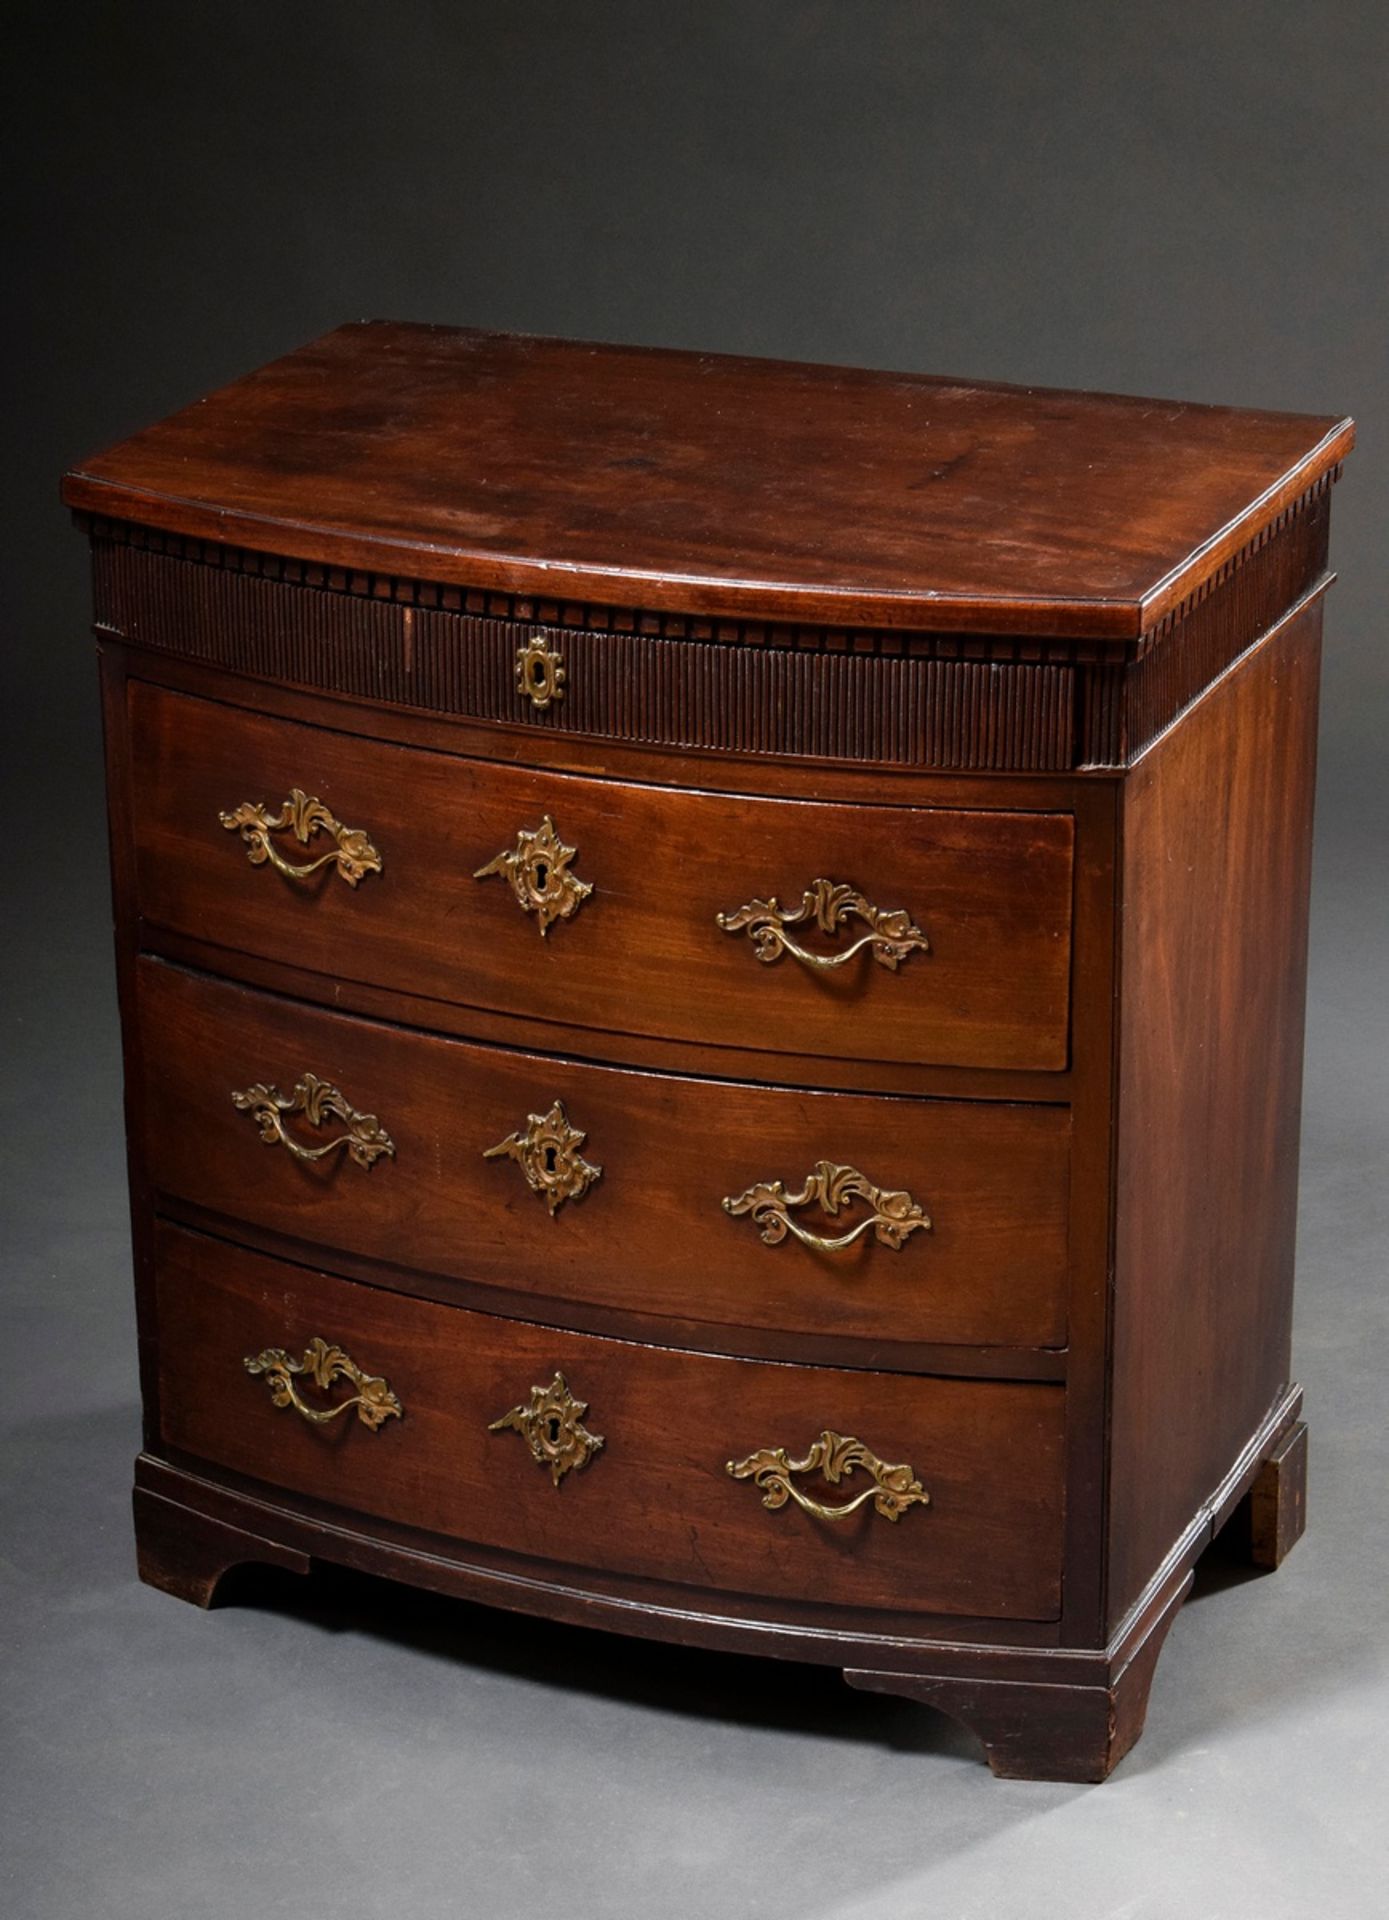 North German demilune chest of drawers with calf tooth and groove moulding, mahogany, c. 1780/1800,